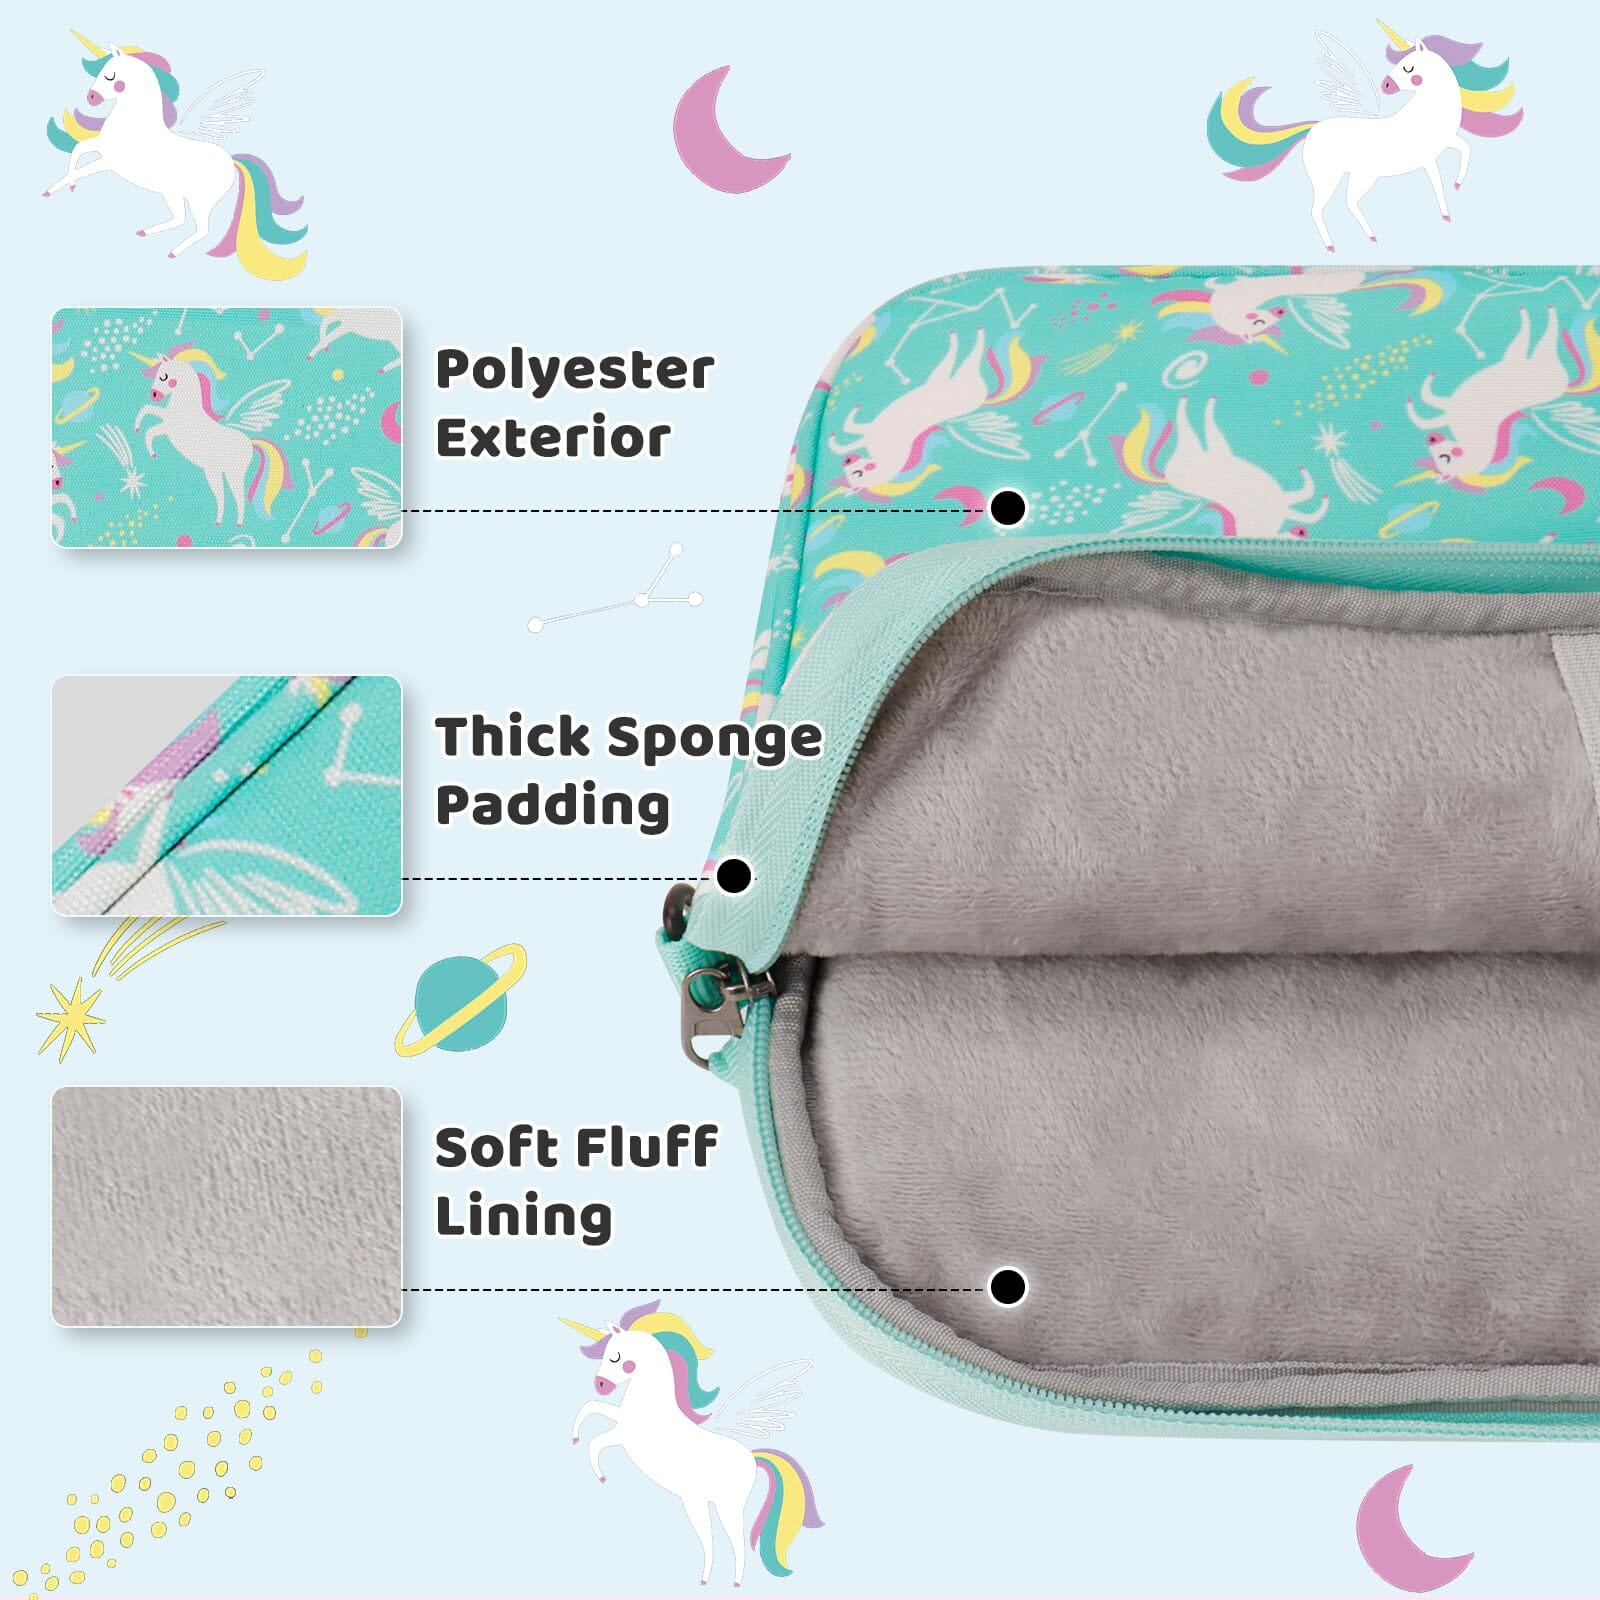 Choco Mocha 12.5 Inch Kids Tablet Sleeve Bag for Girls, Kids Tablet Carrying Case for Fire HD 10, Fire 7, Fire HD 8, Fire 10 Tablet, Kindle Kids Edition, Apple iPad, Unicorn, Teal chocomochakids 